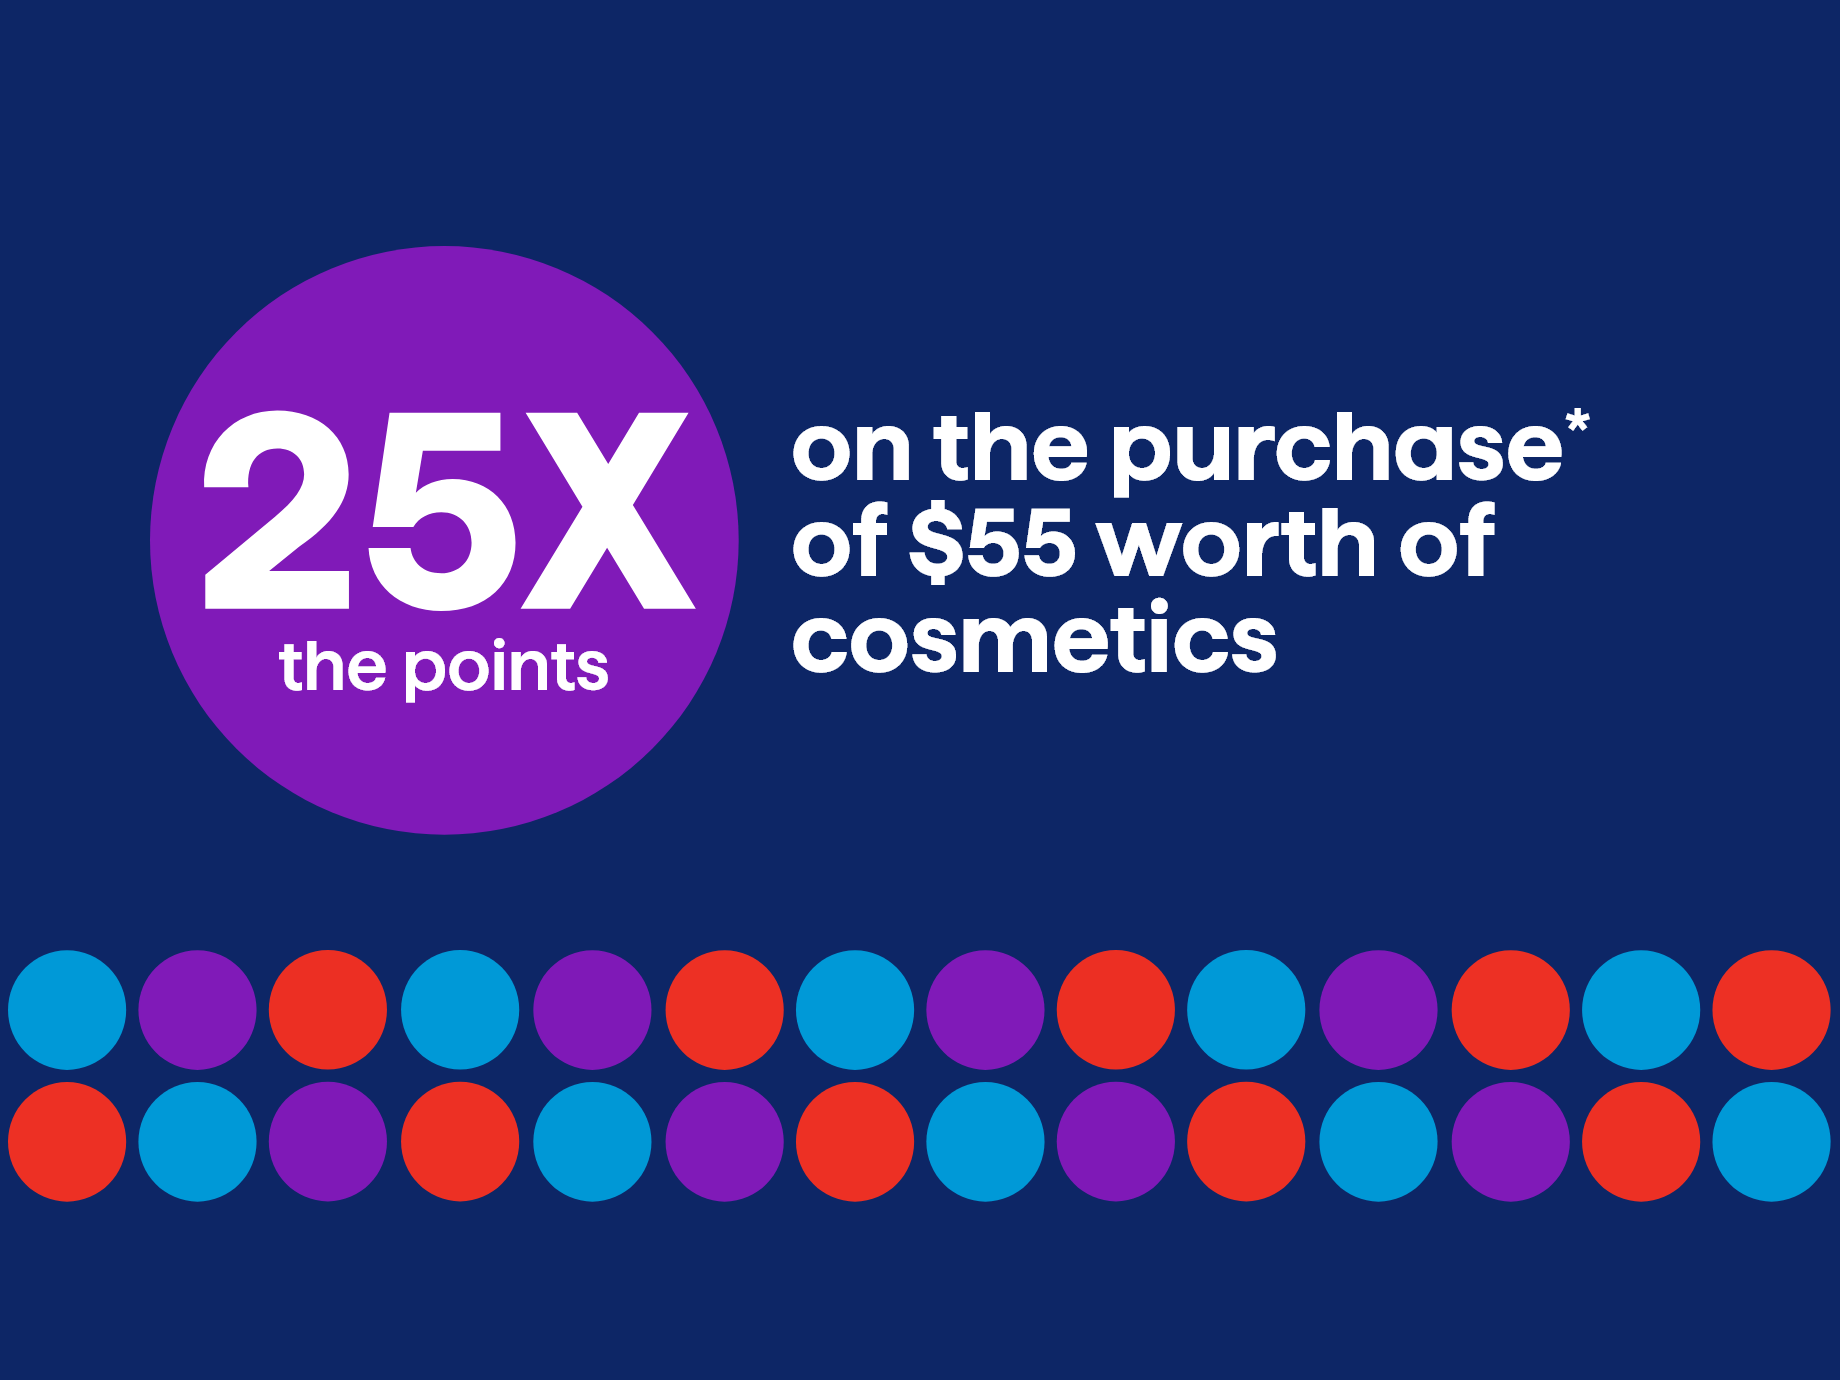 25X the points on the purchase* of $55 worth of cosmetics